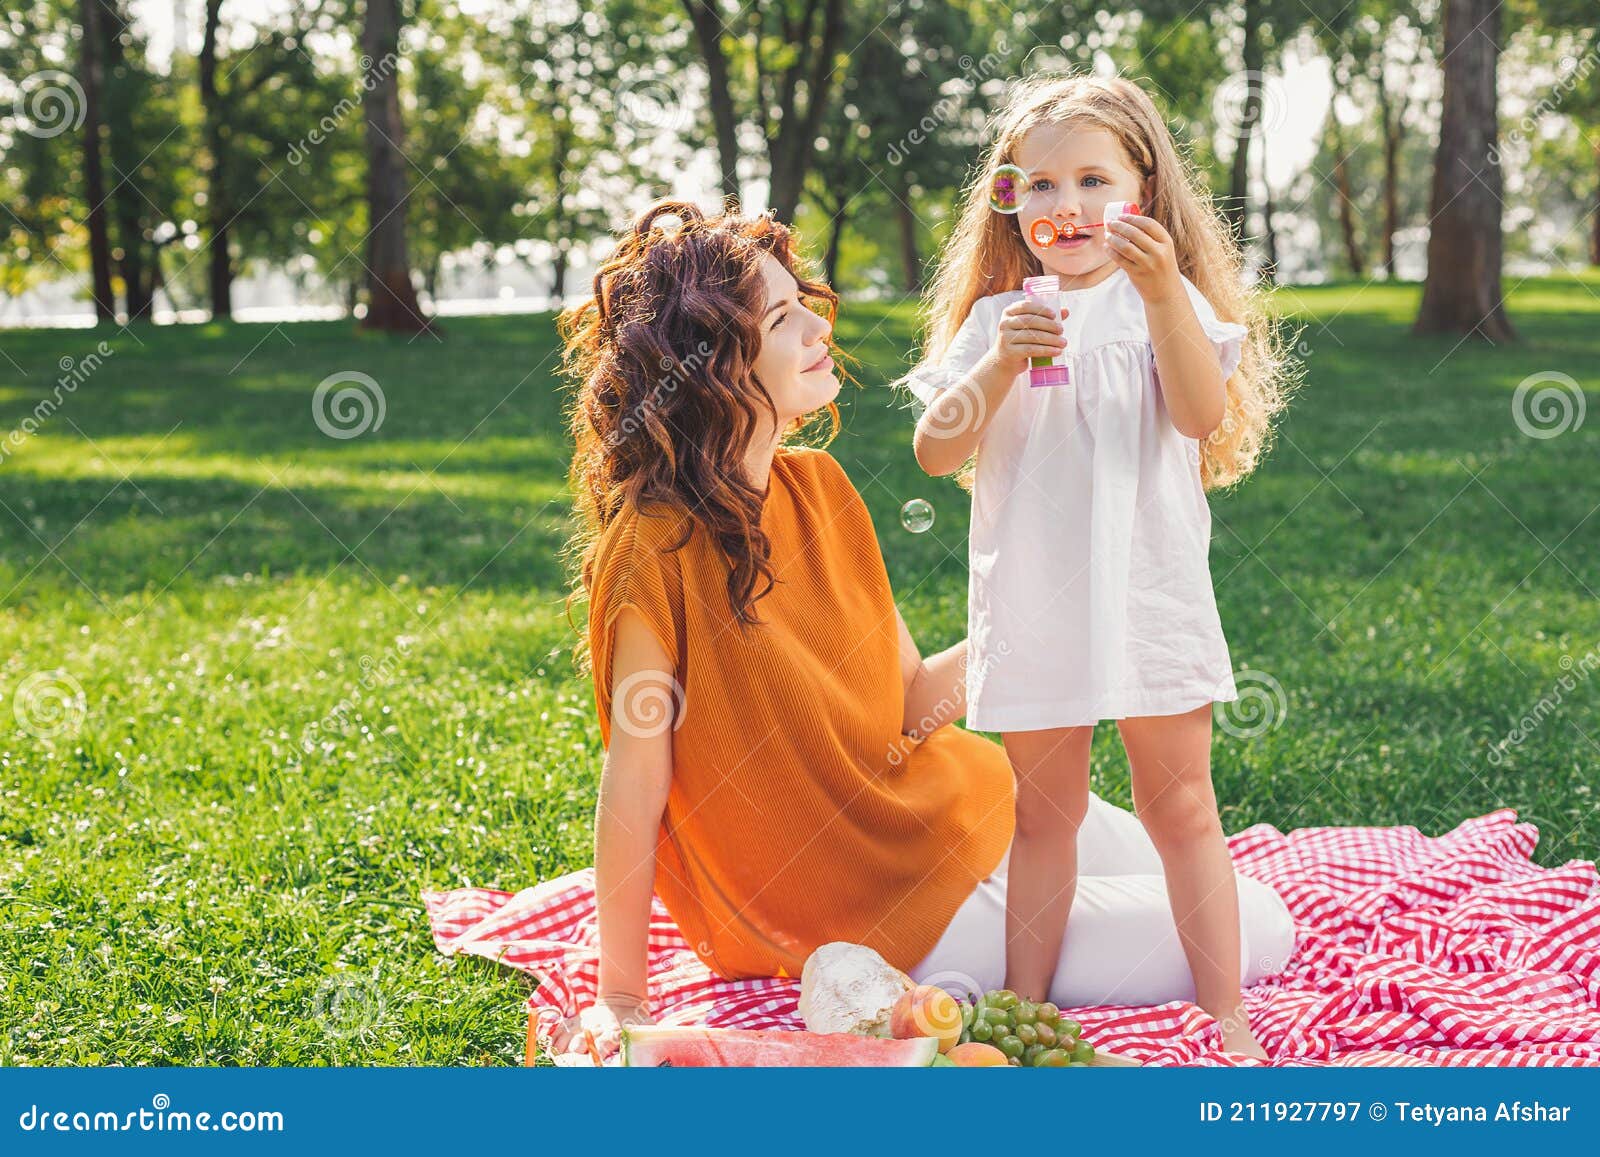 mother looking her daughter blowing sopa bubbles in the park